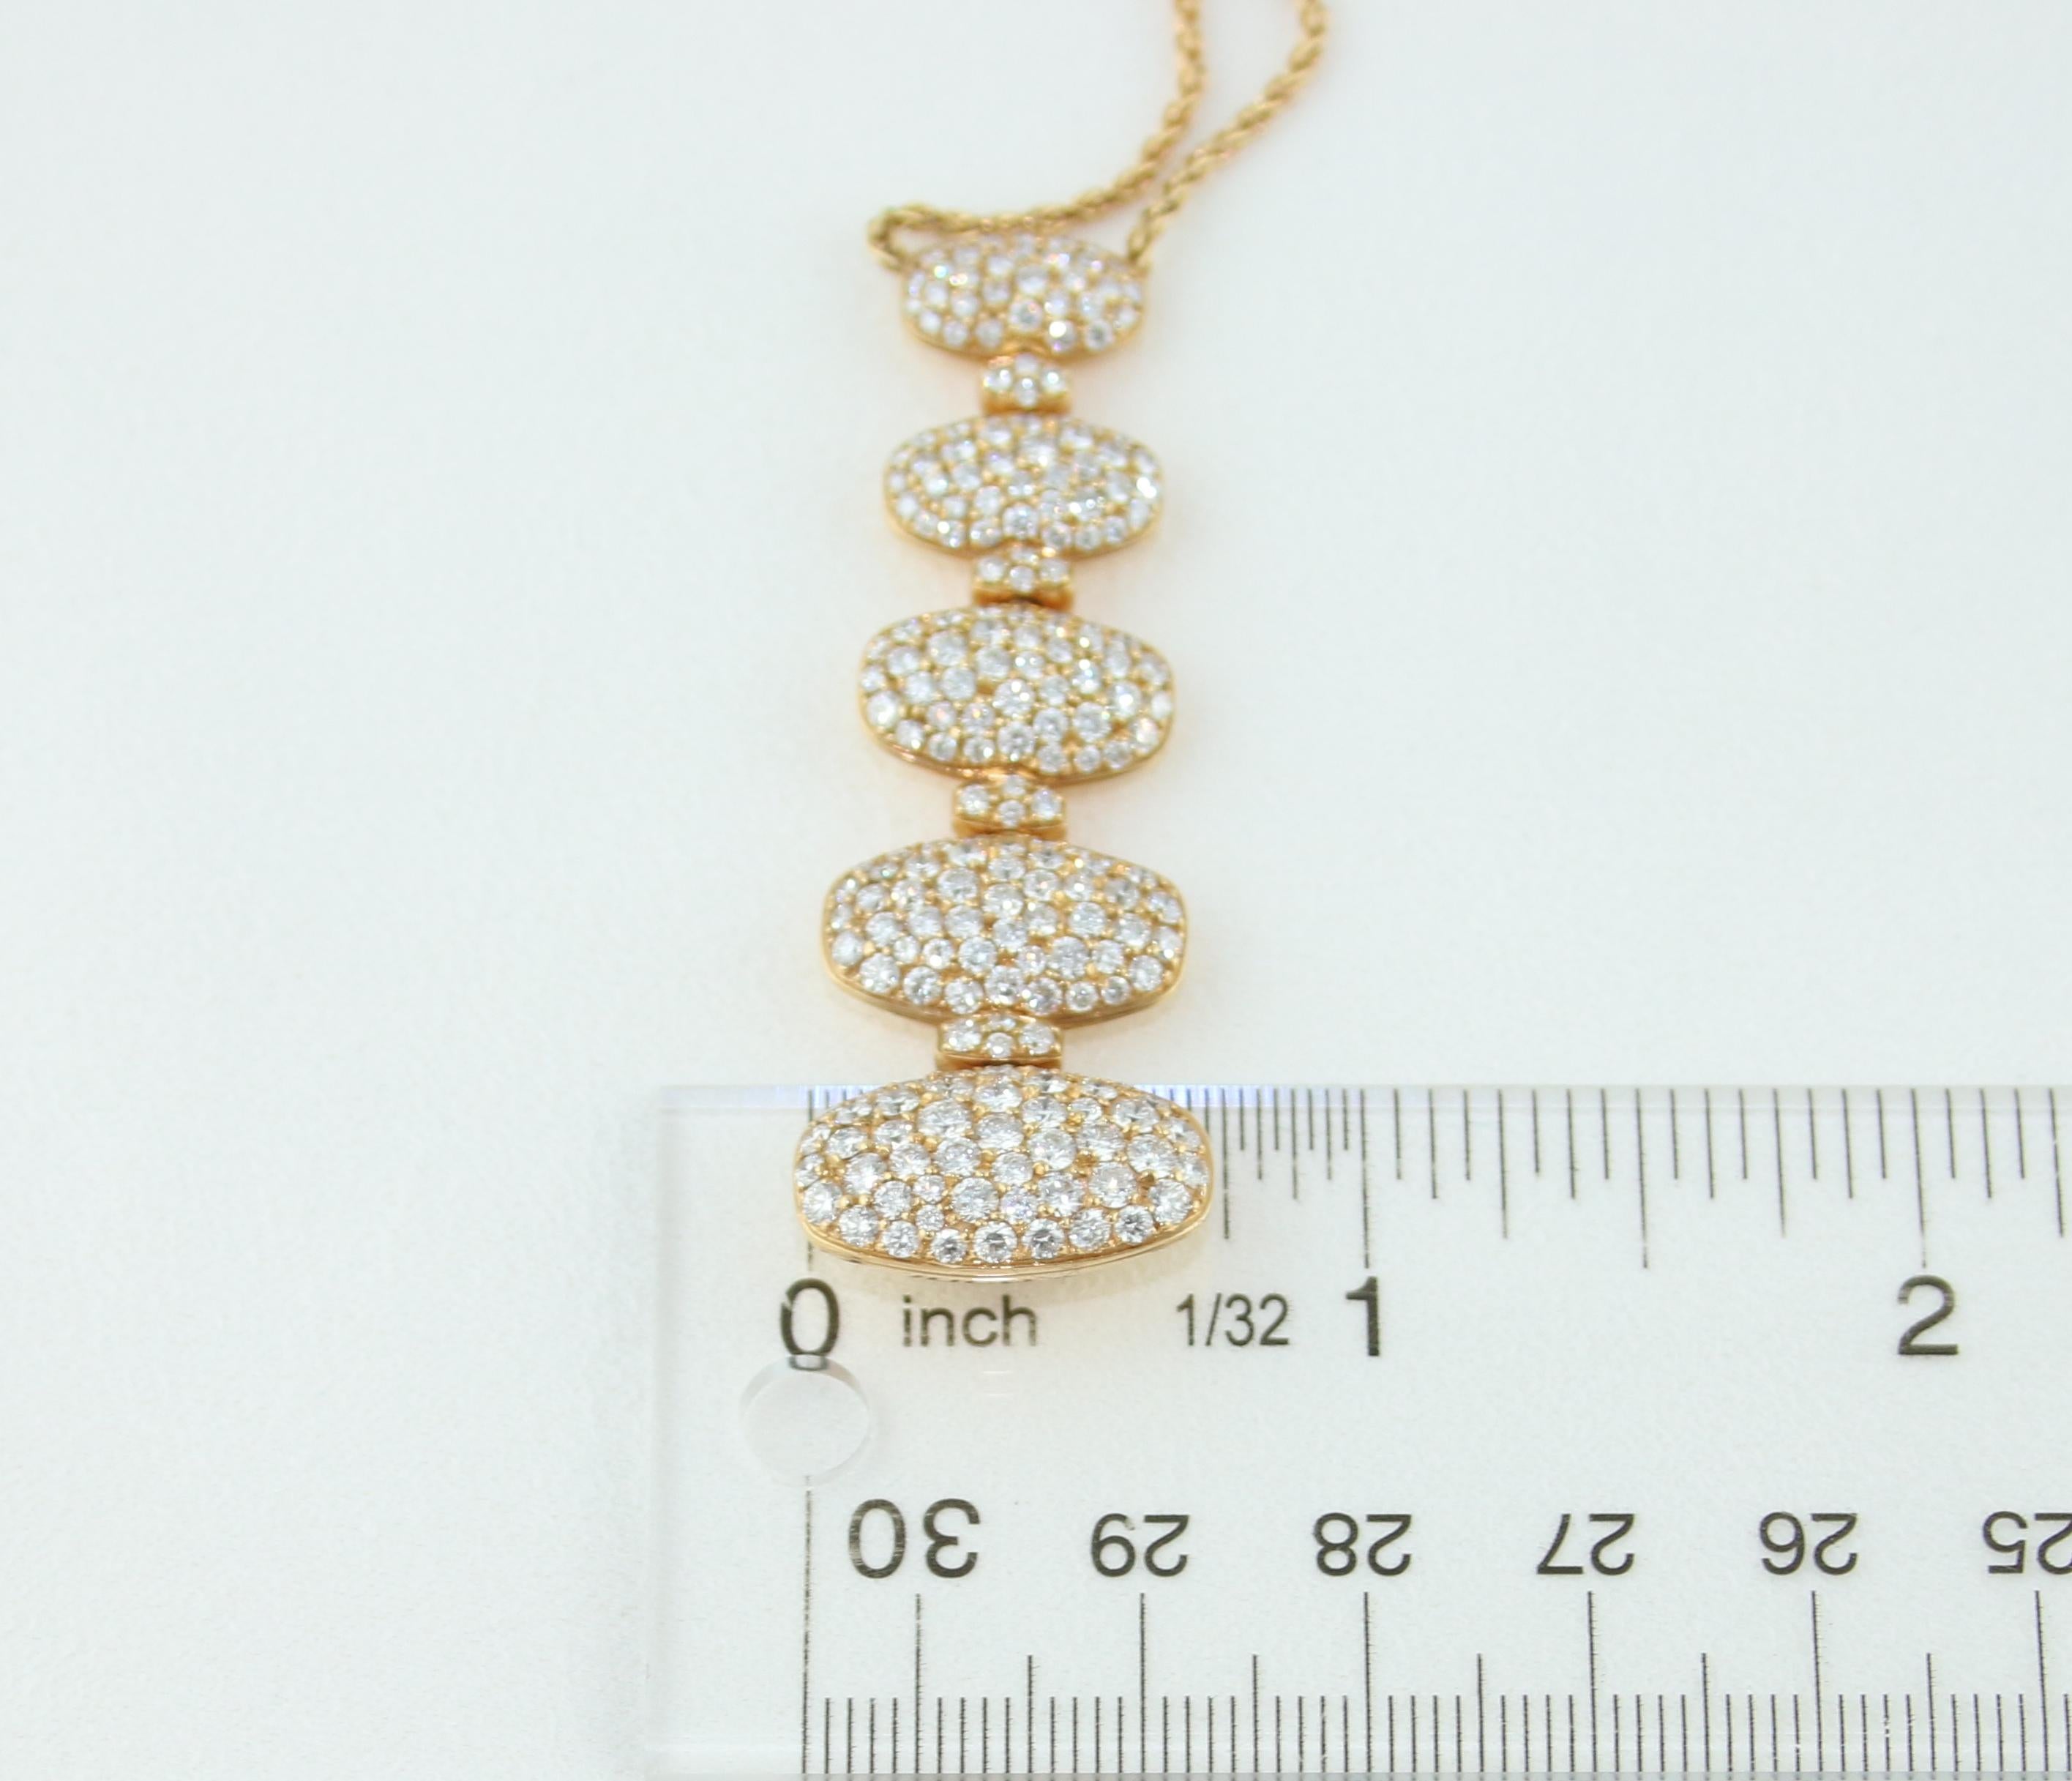 de Grisogono 5 Tier 3.65 Carat Diamond Gold Necklace In New Condition For Sale In New York, NY